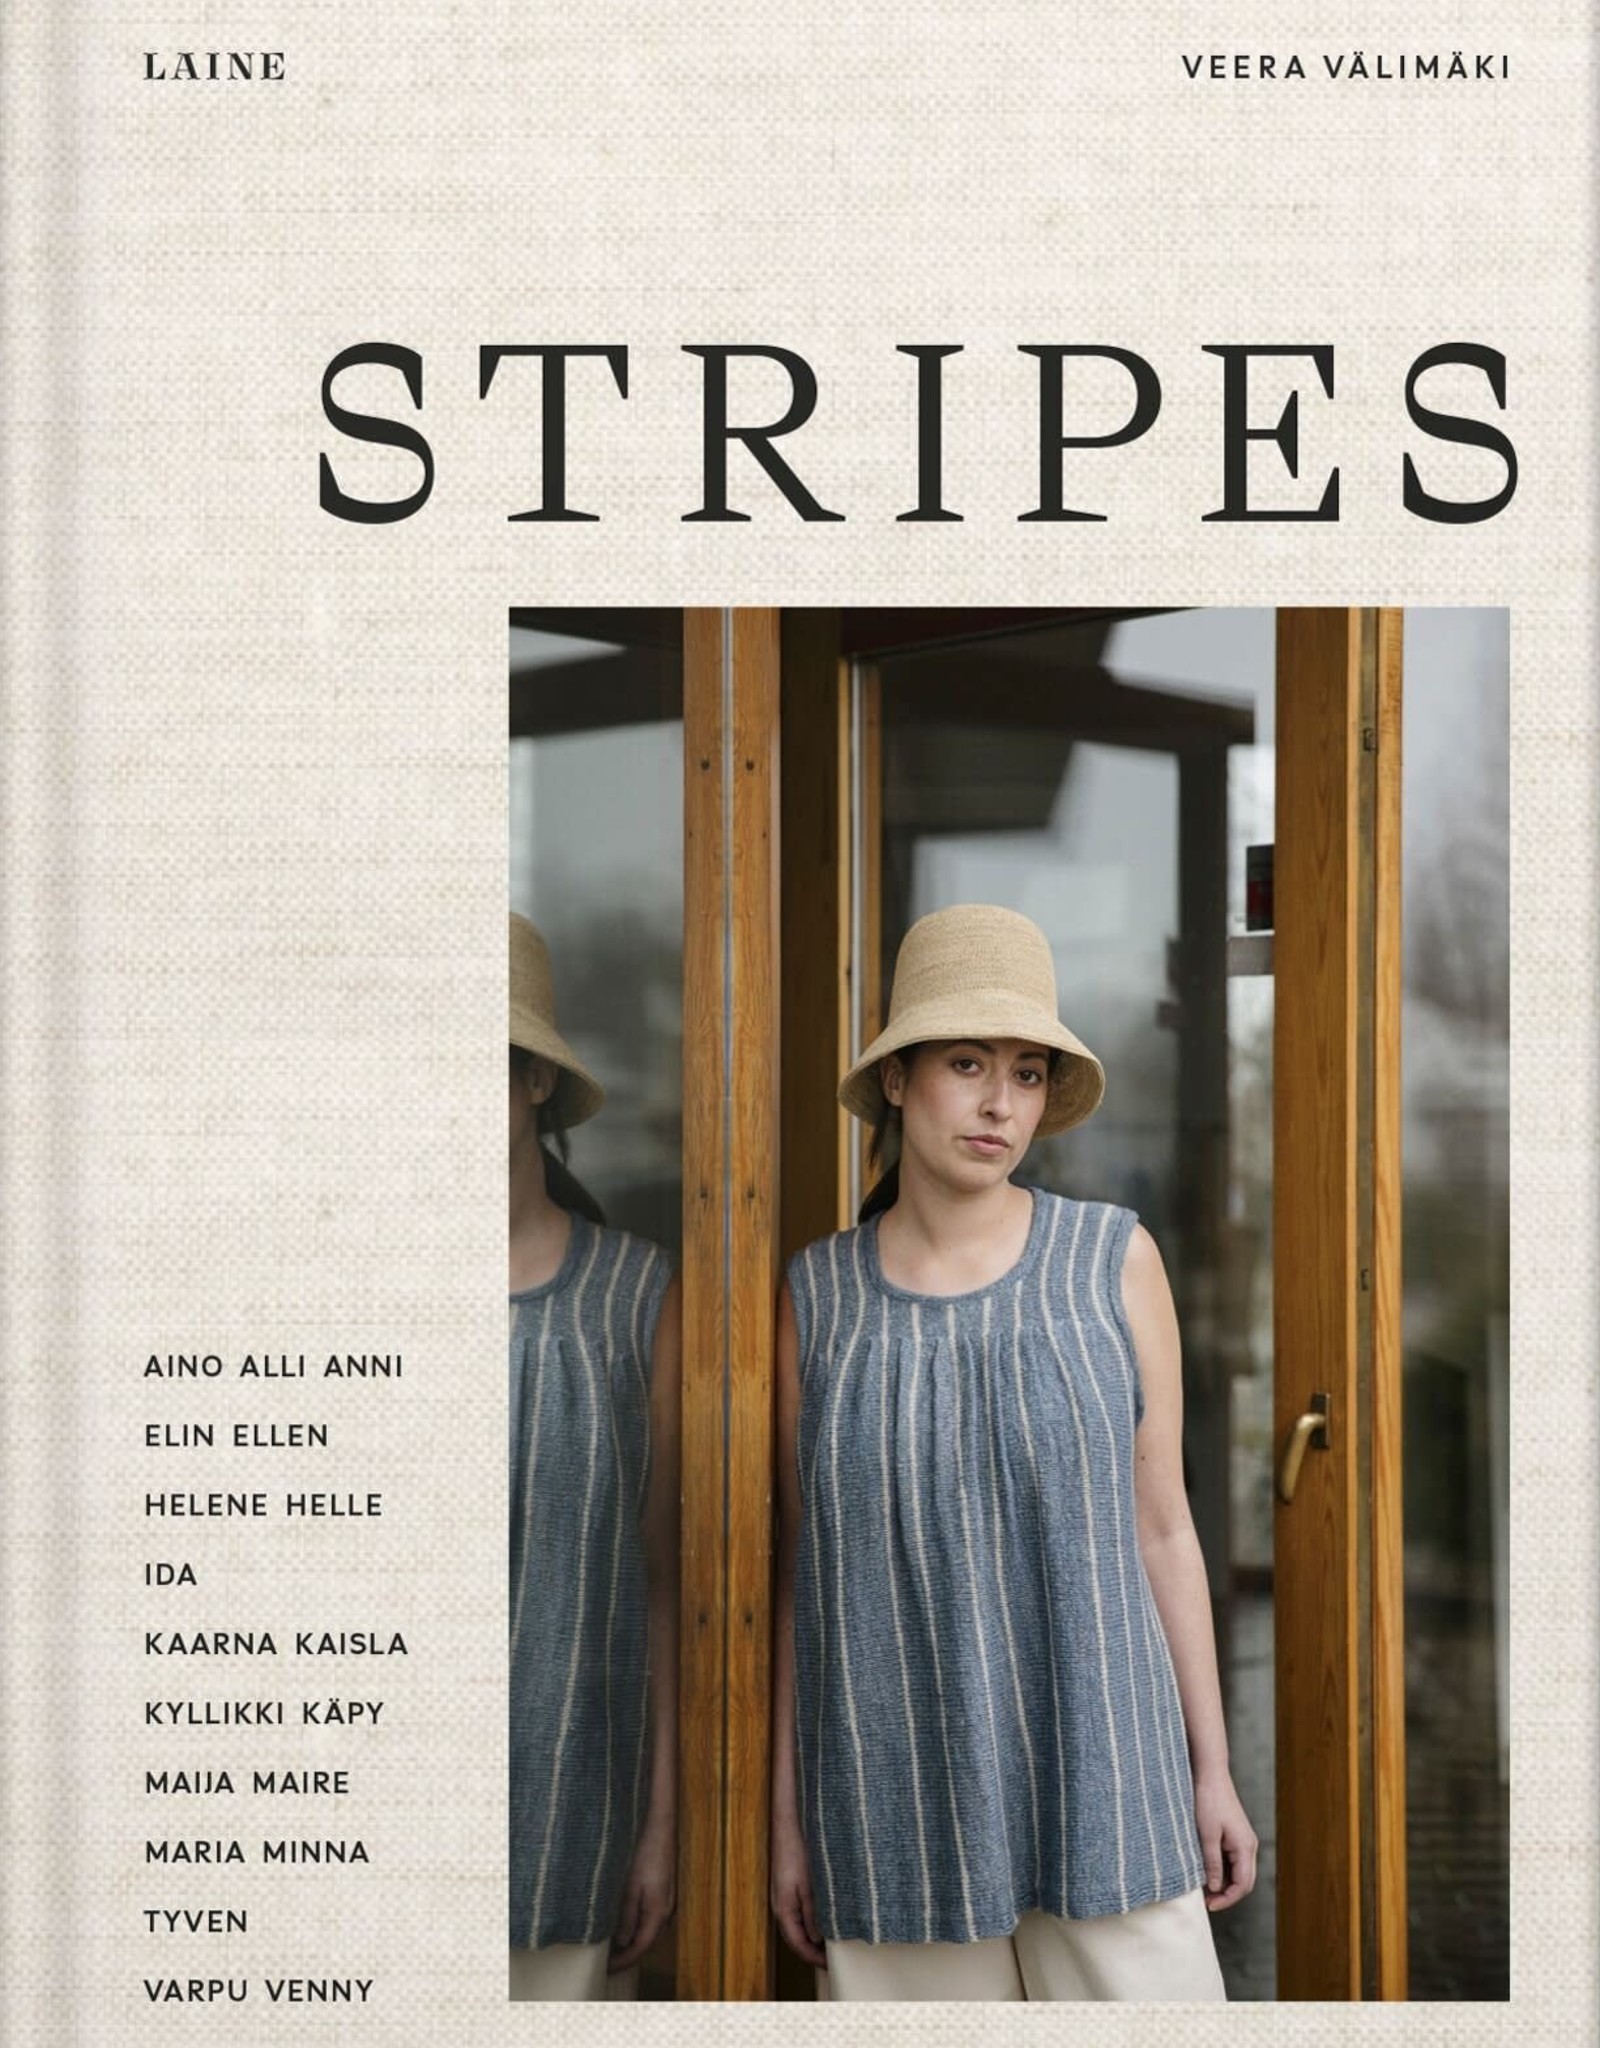 Book - Stripes by Laine